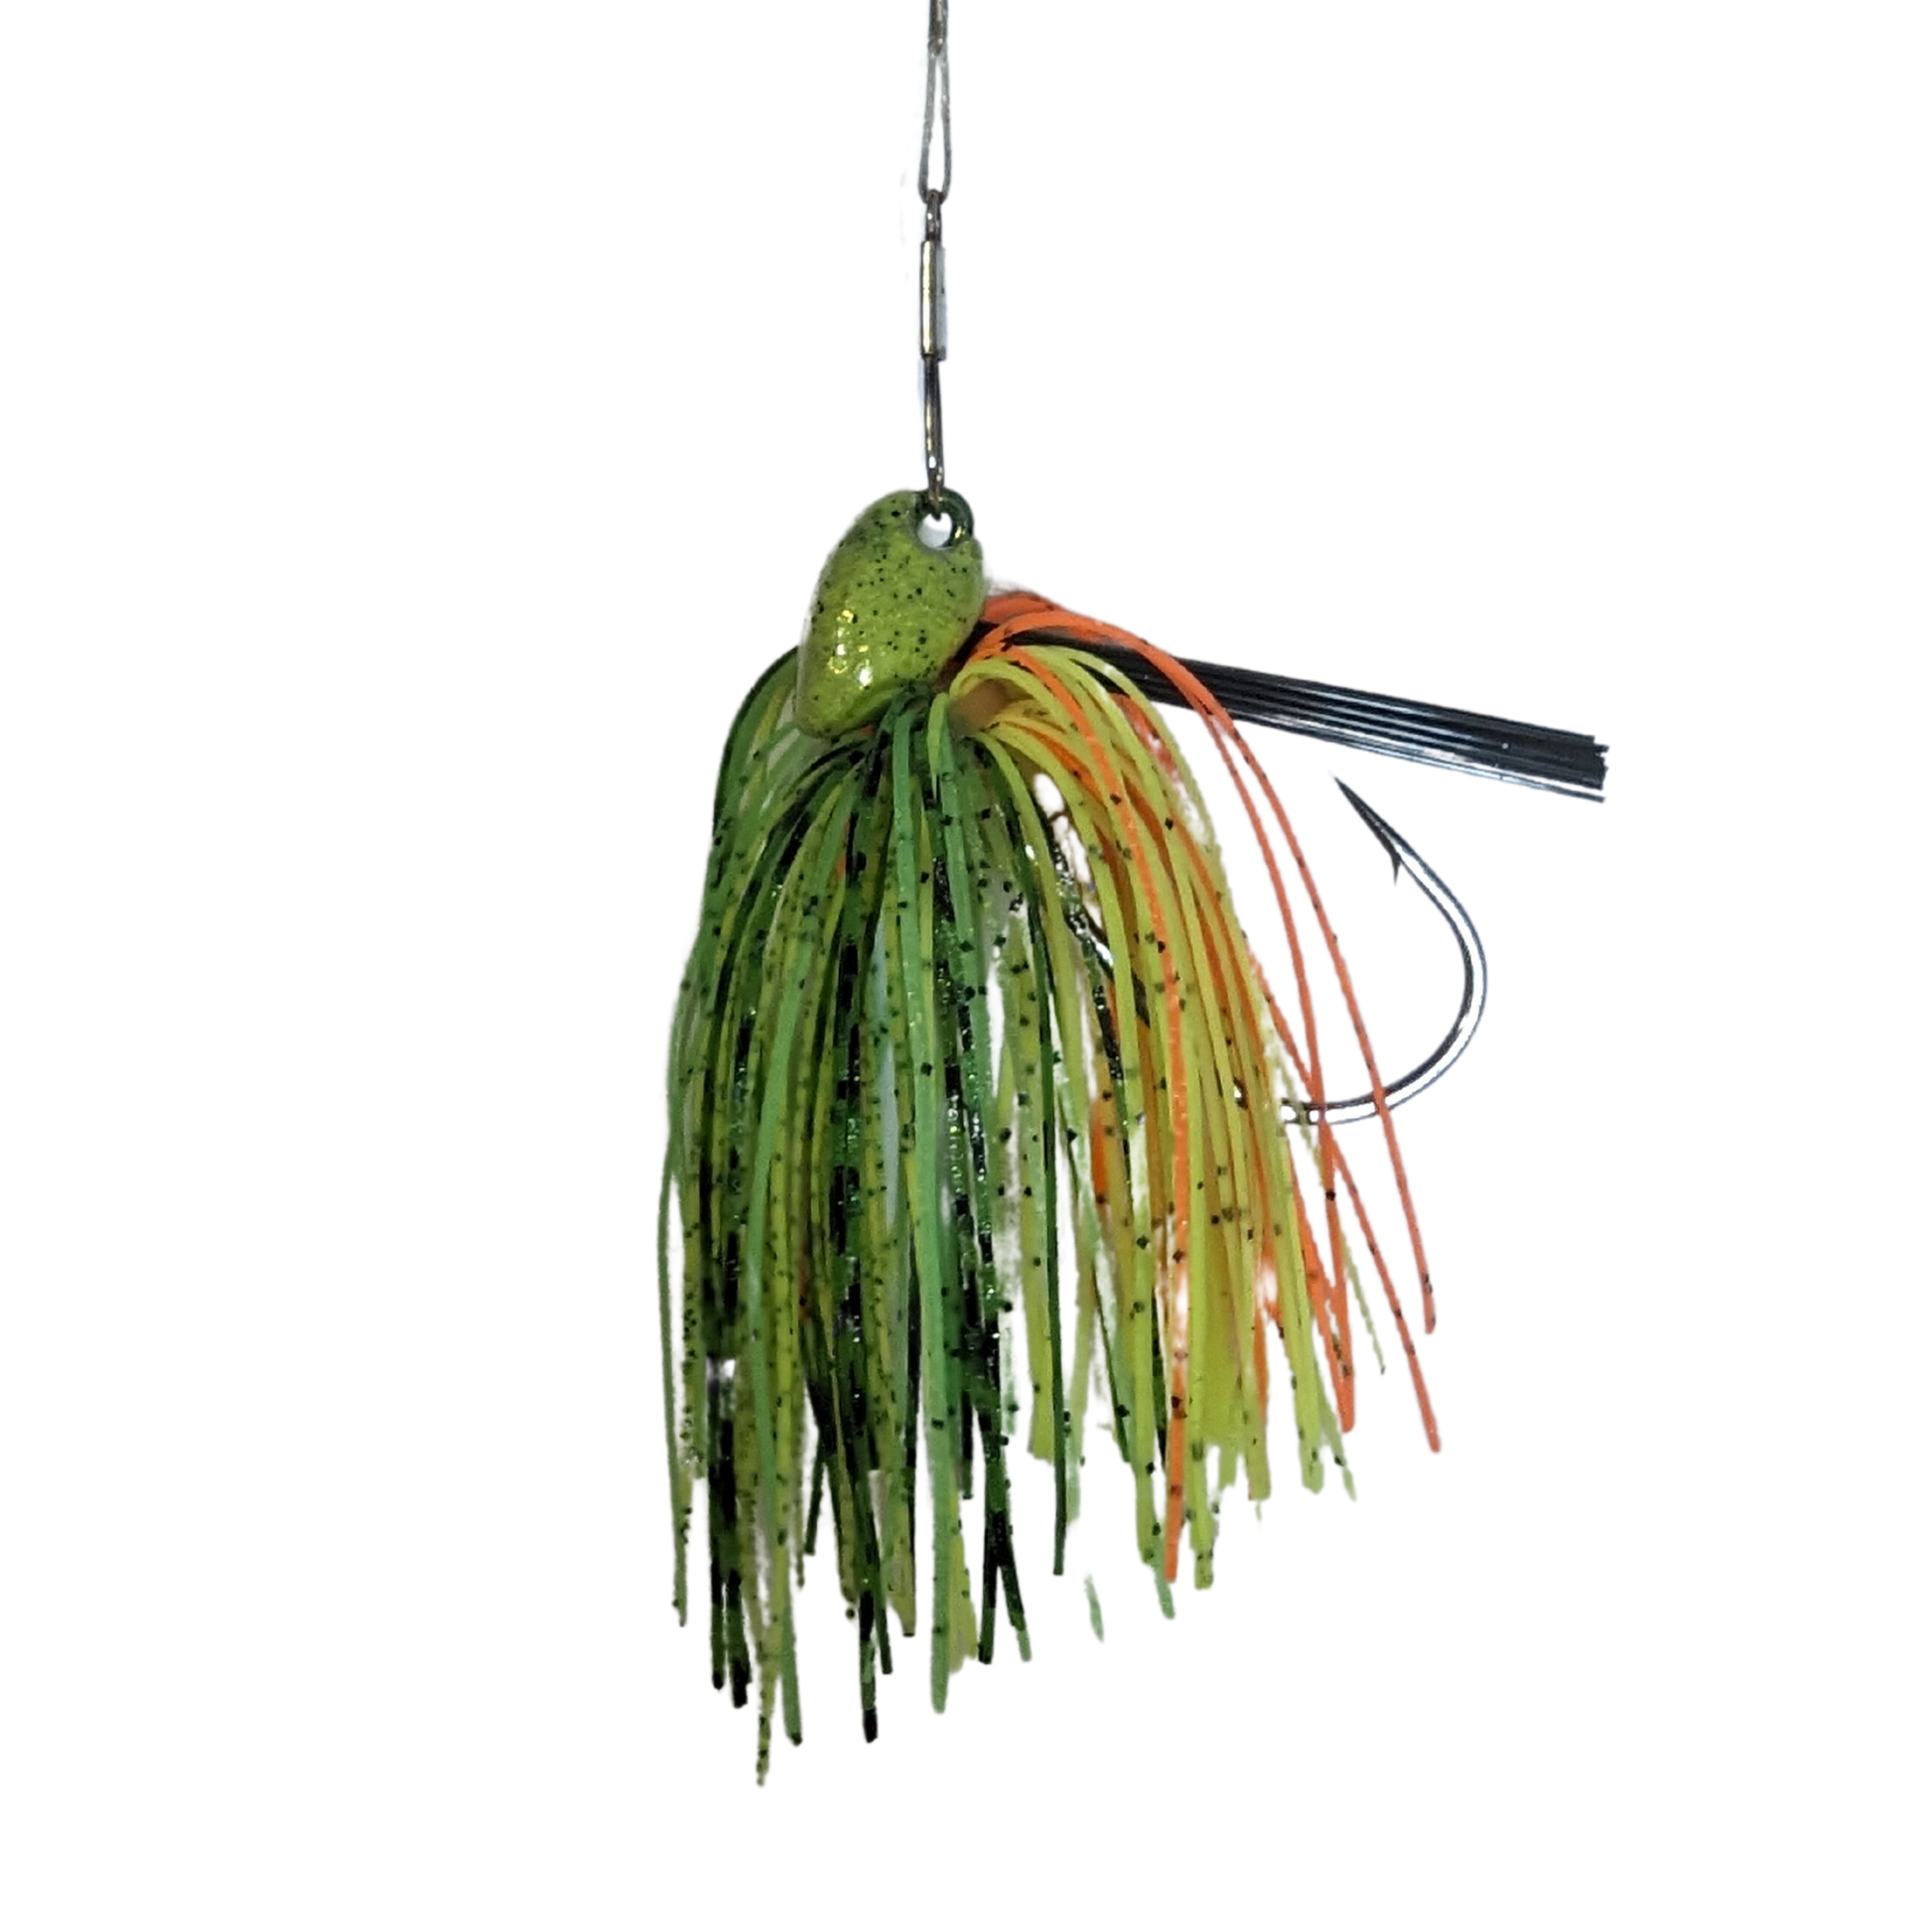 Bright color green jig with firetiger skirt for bass fishing with weed guard and hidden eye